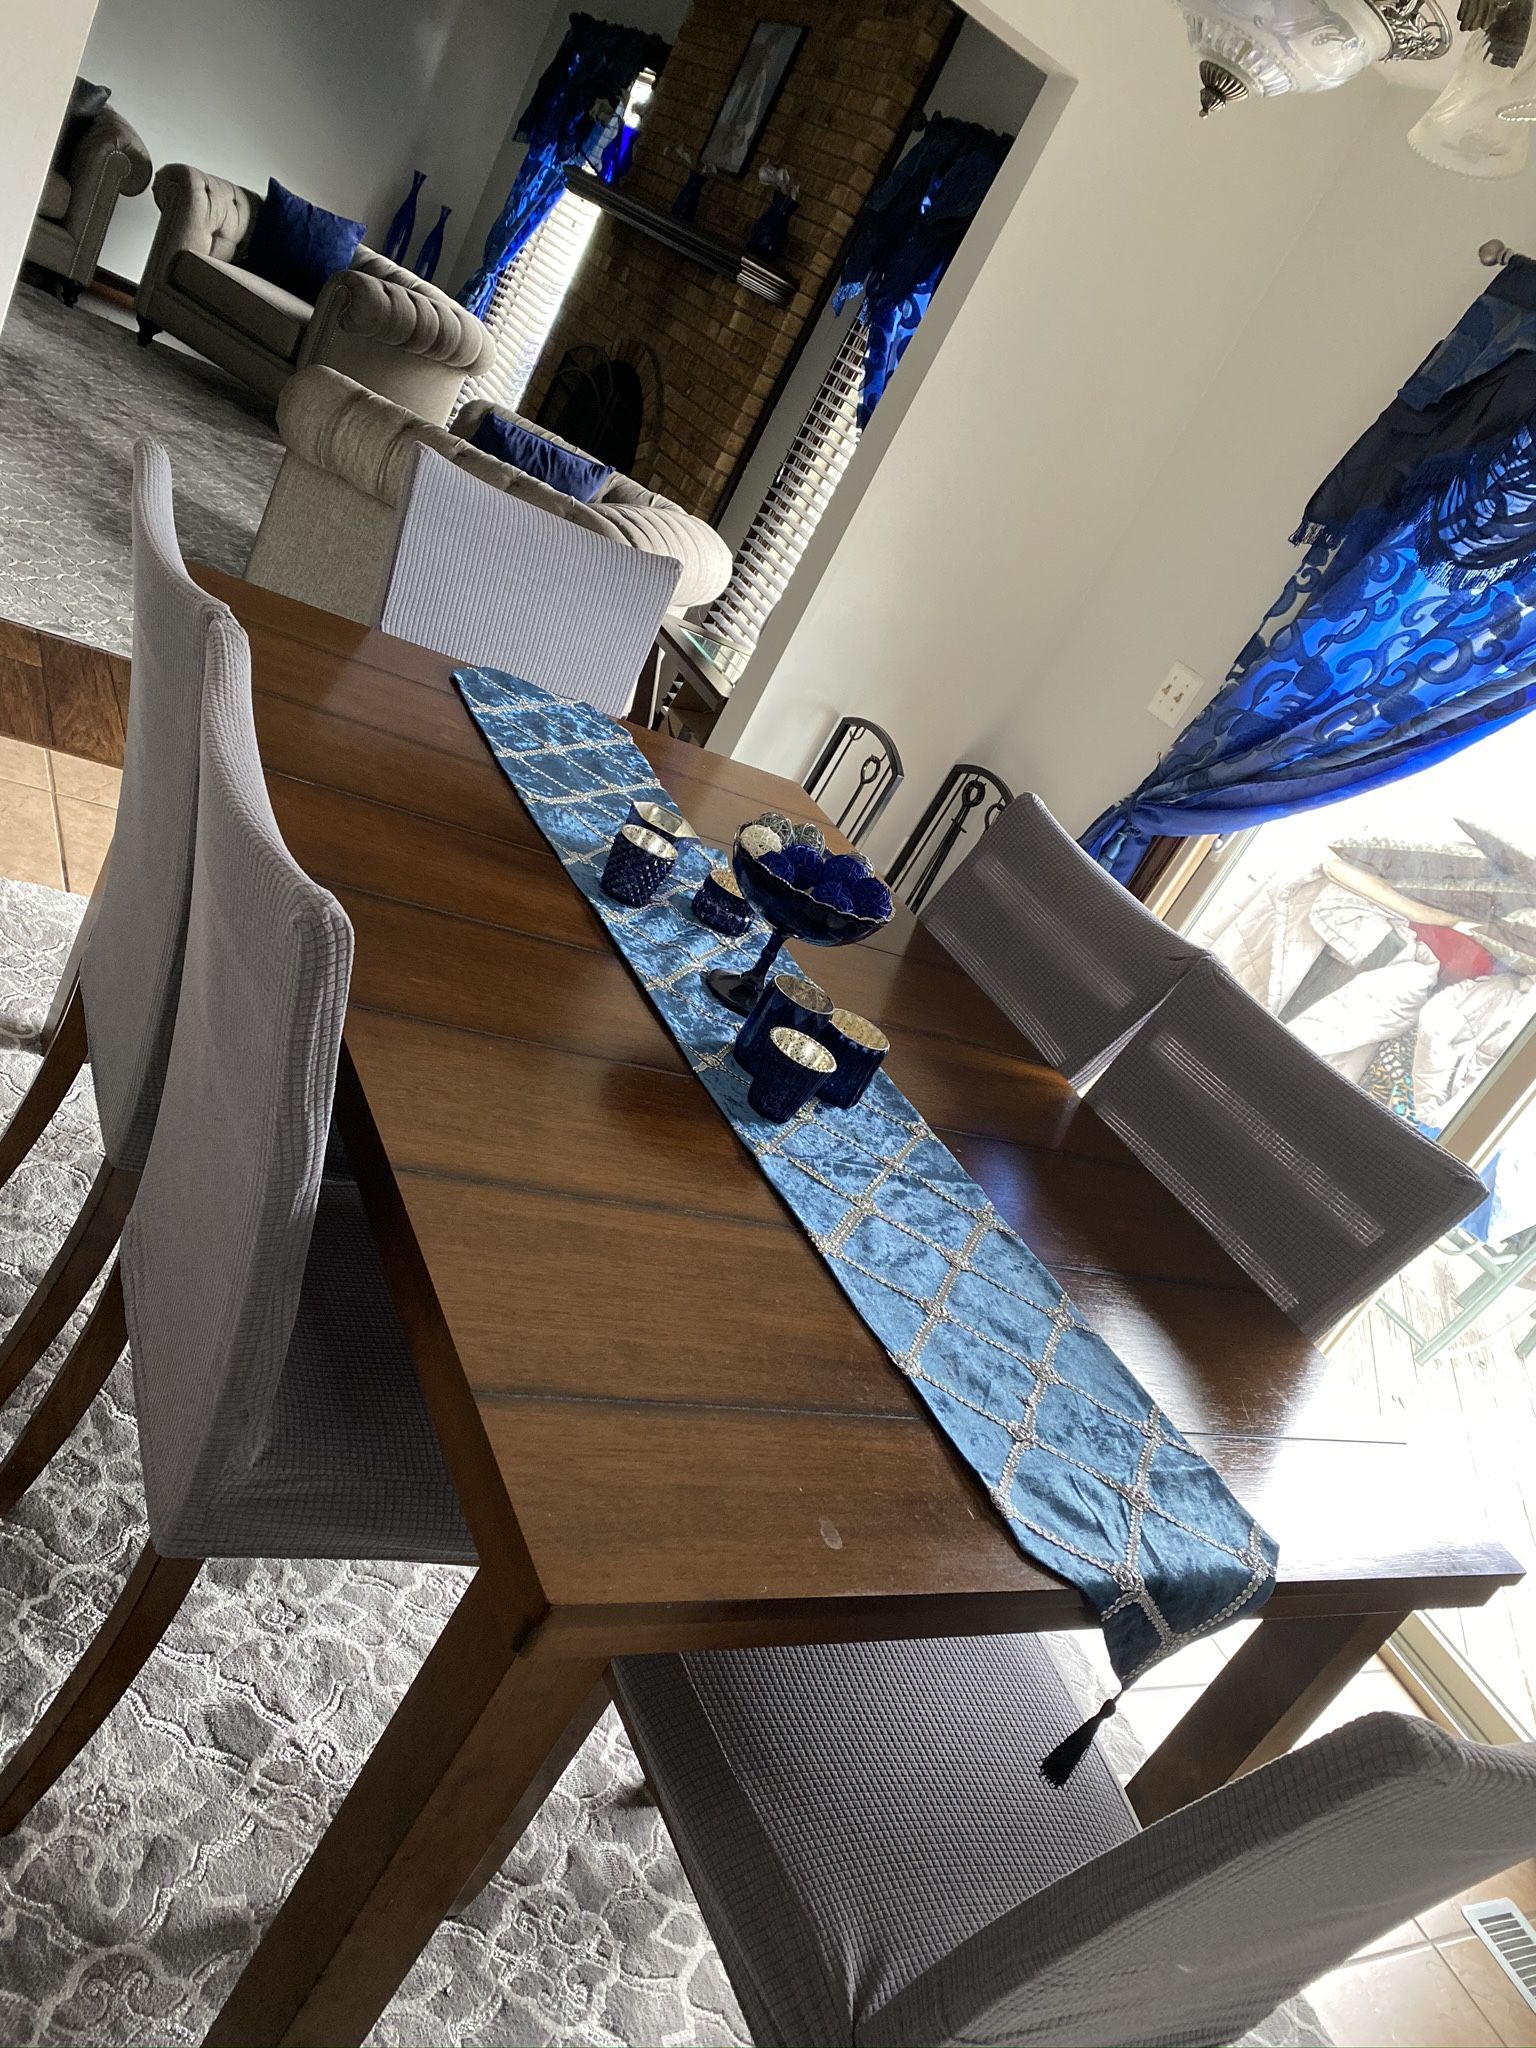 Dining table With 6 Chairs